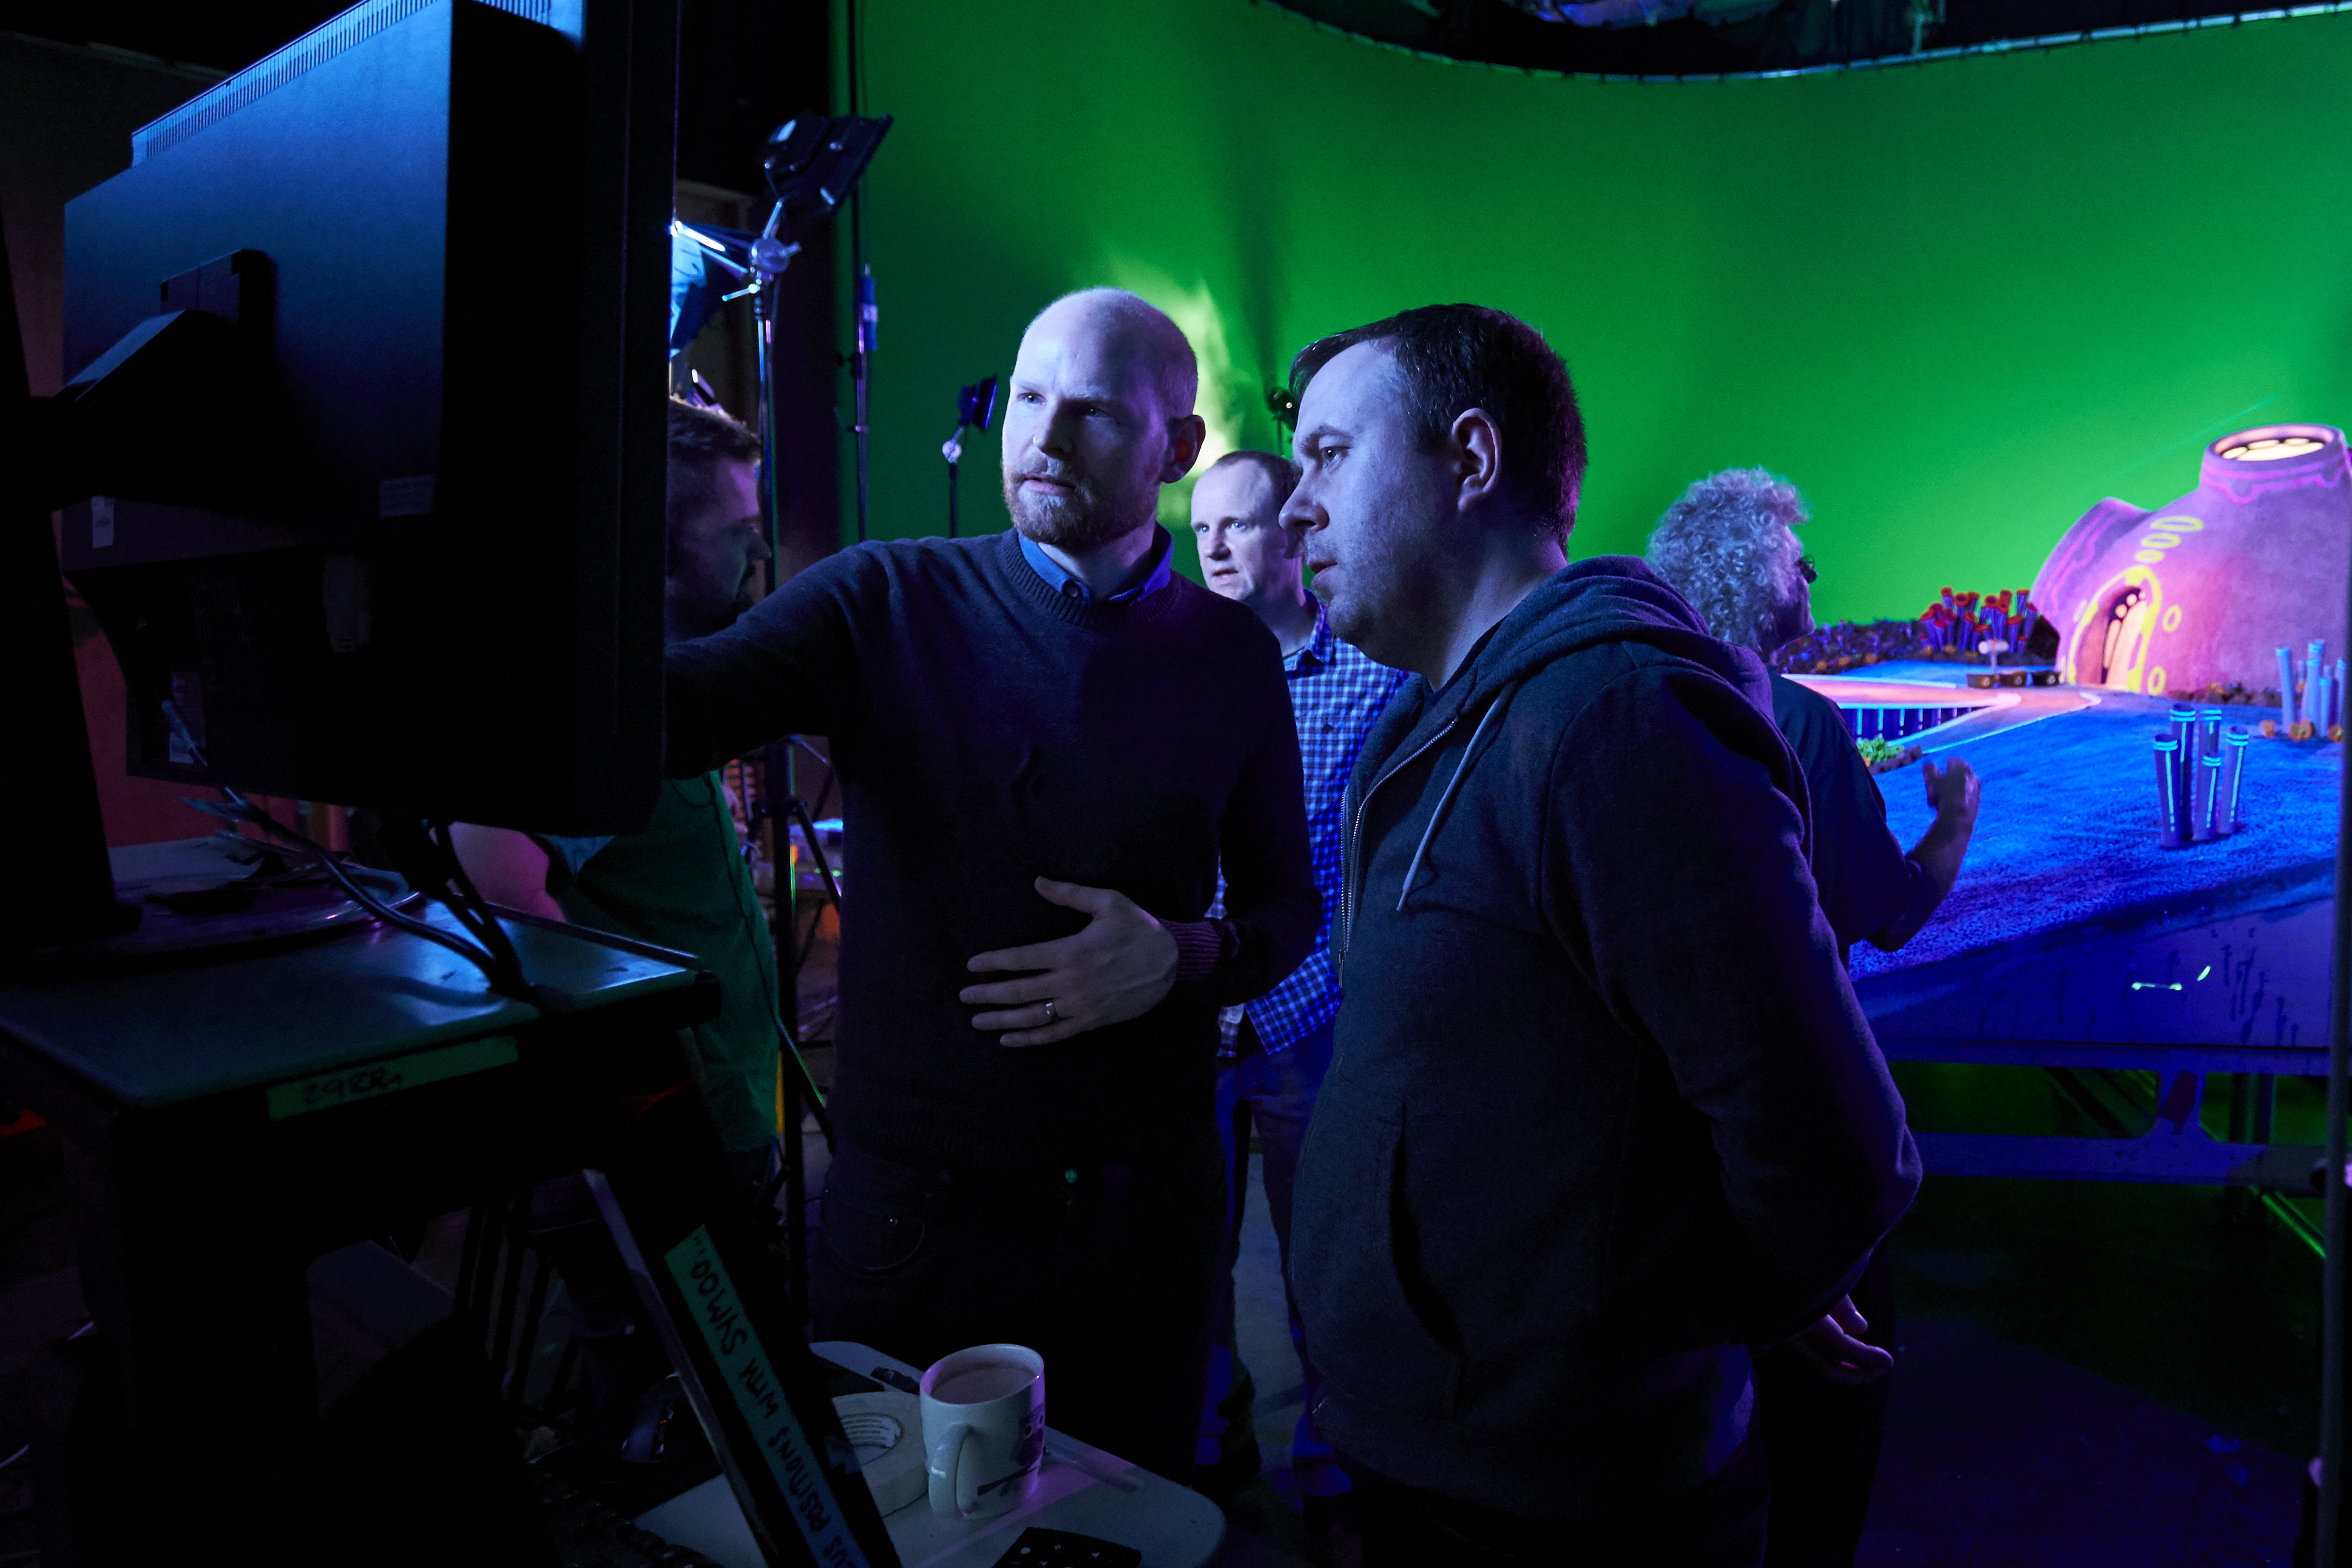 Directors Will Becher (L) and Richard Phelan (R) briefing on set.